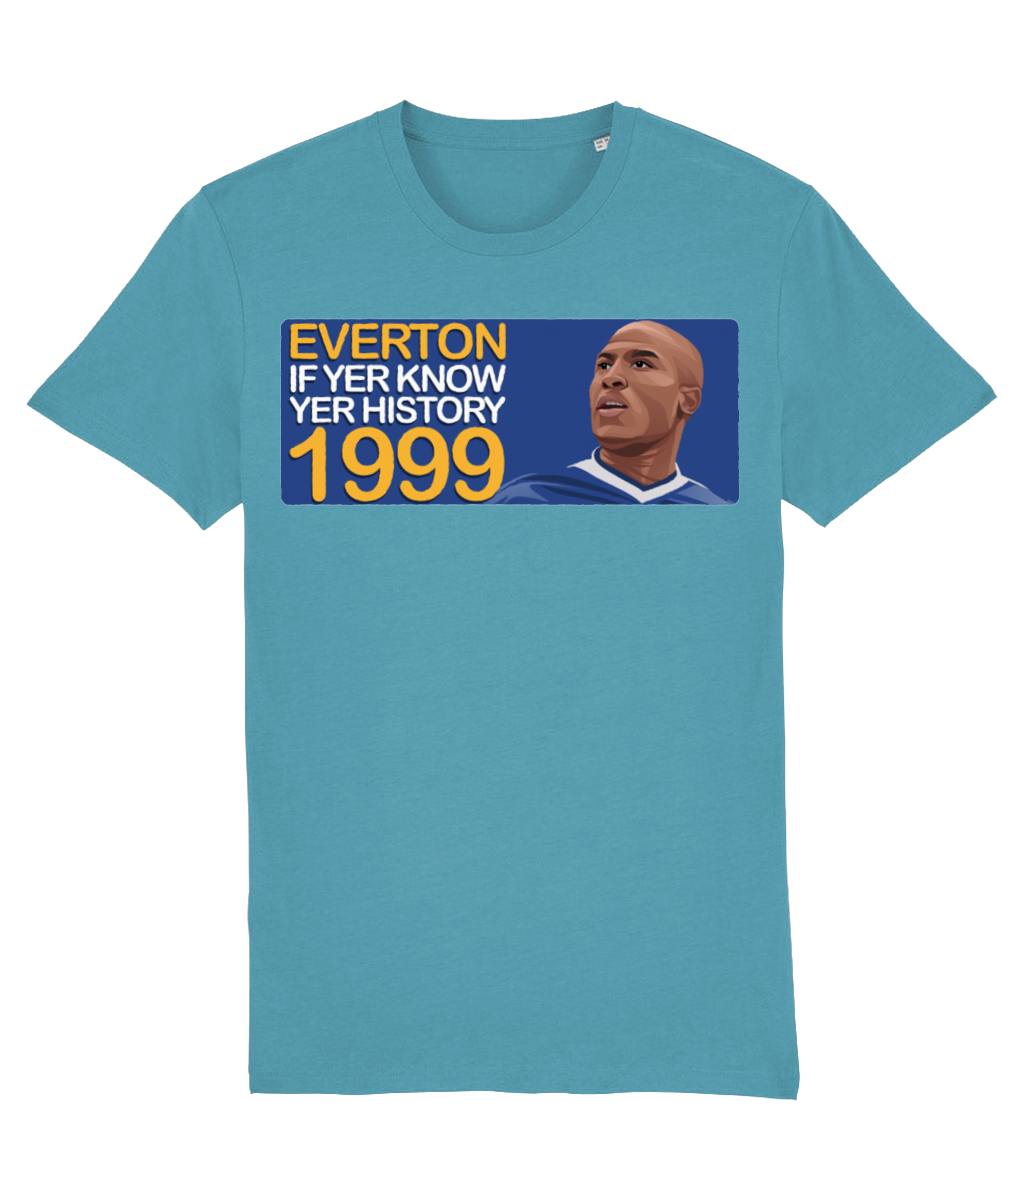 Everton 1999 Kevin Campbell If Yer Know Yer History Unisex T-Shirt Stanley/Stella Retrotext Atlantic Blue XX-Small 